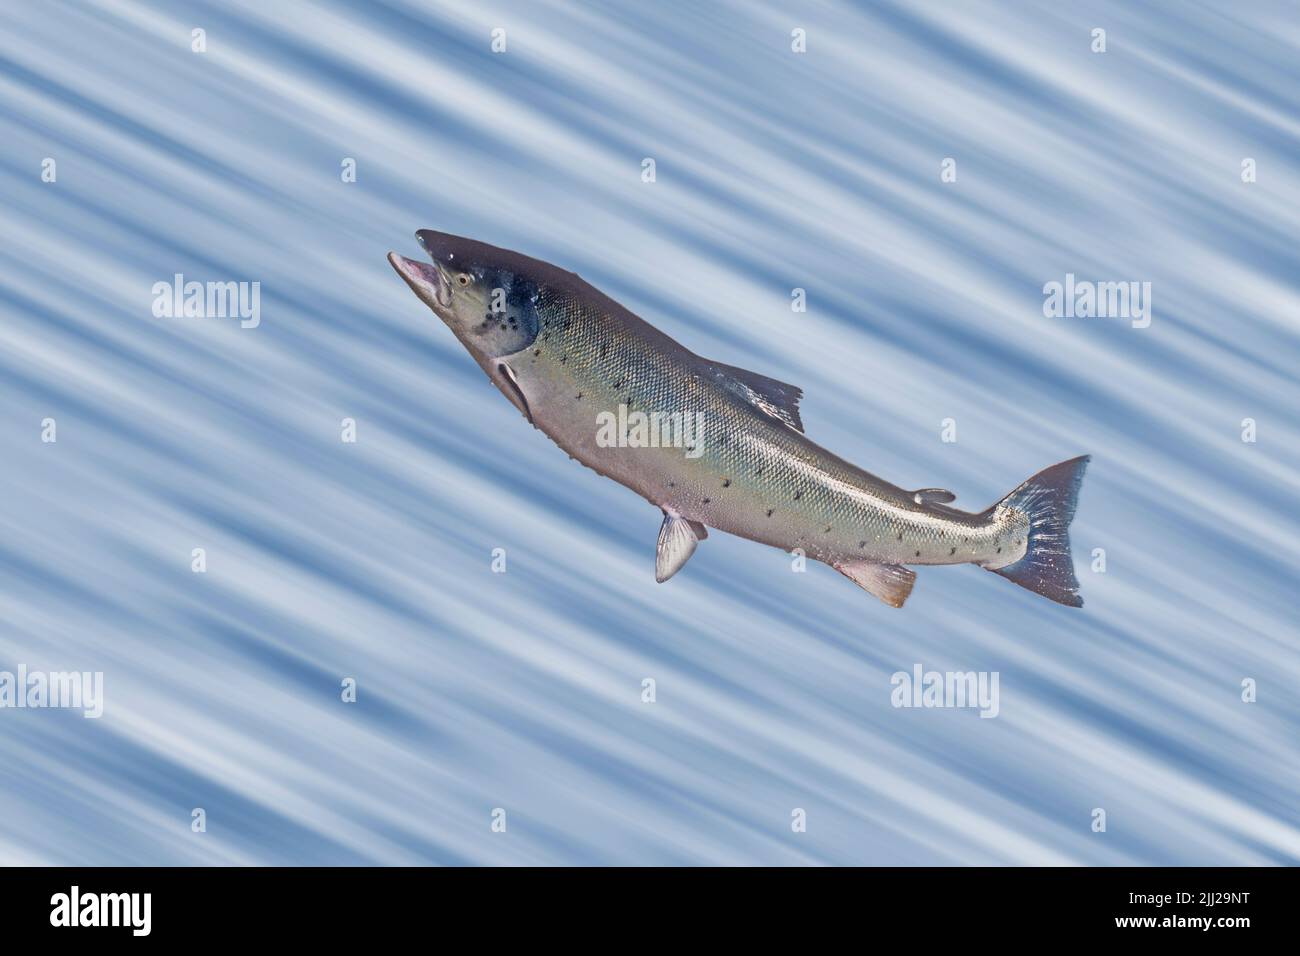 Leaping salmon on a blurred background Stock Photo